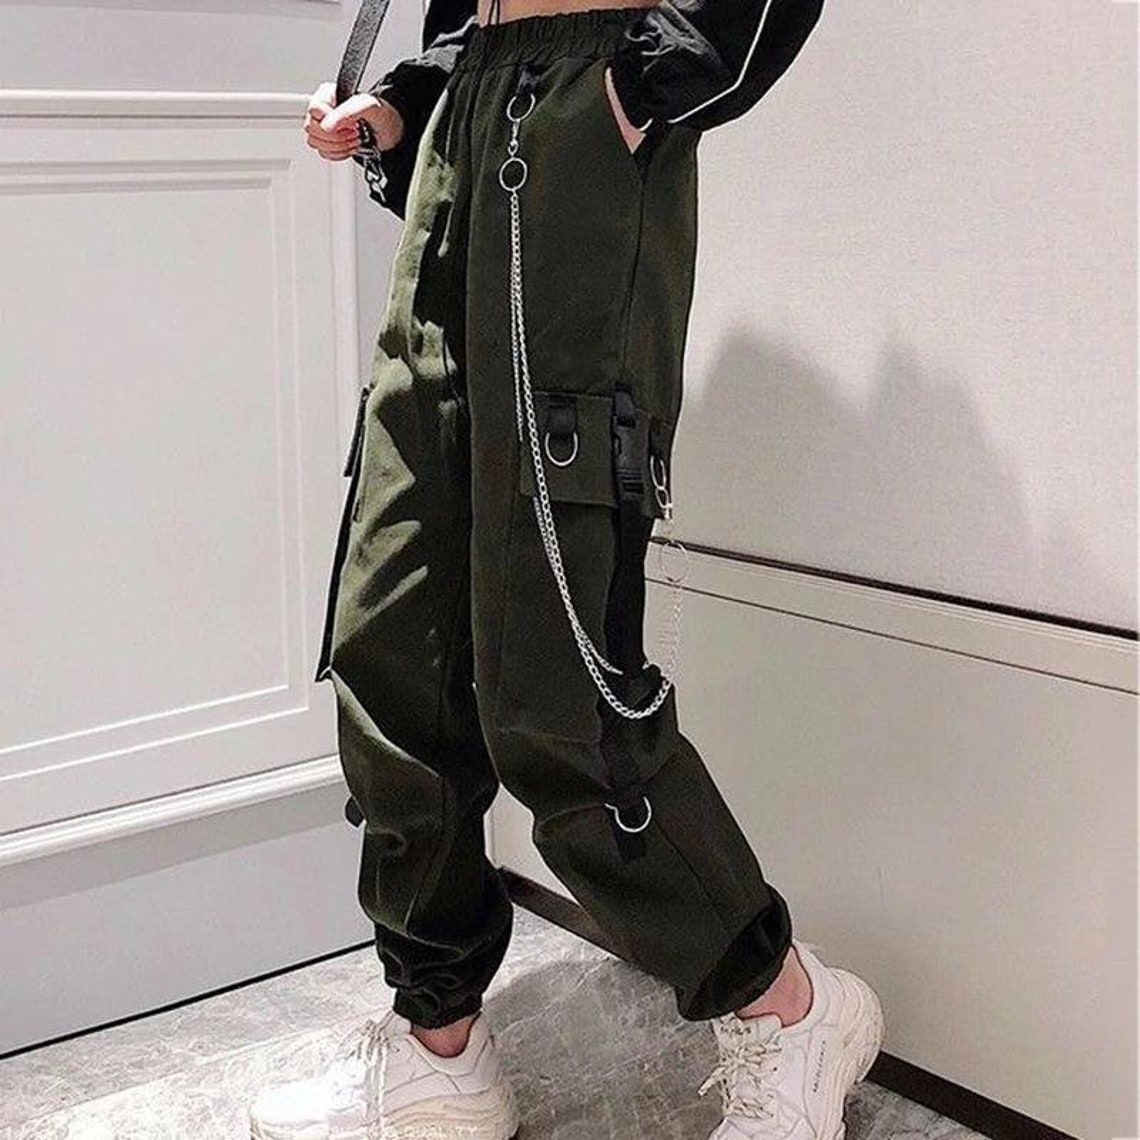 Cargo Gothic Pants with Chain Streetwear Black baggy Cargo | Etsy